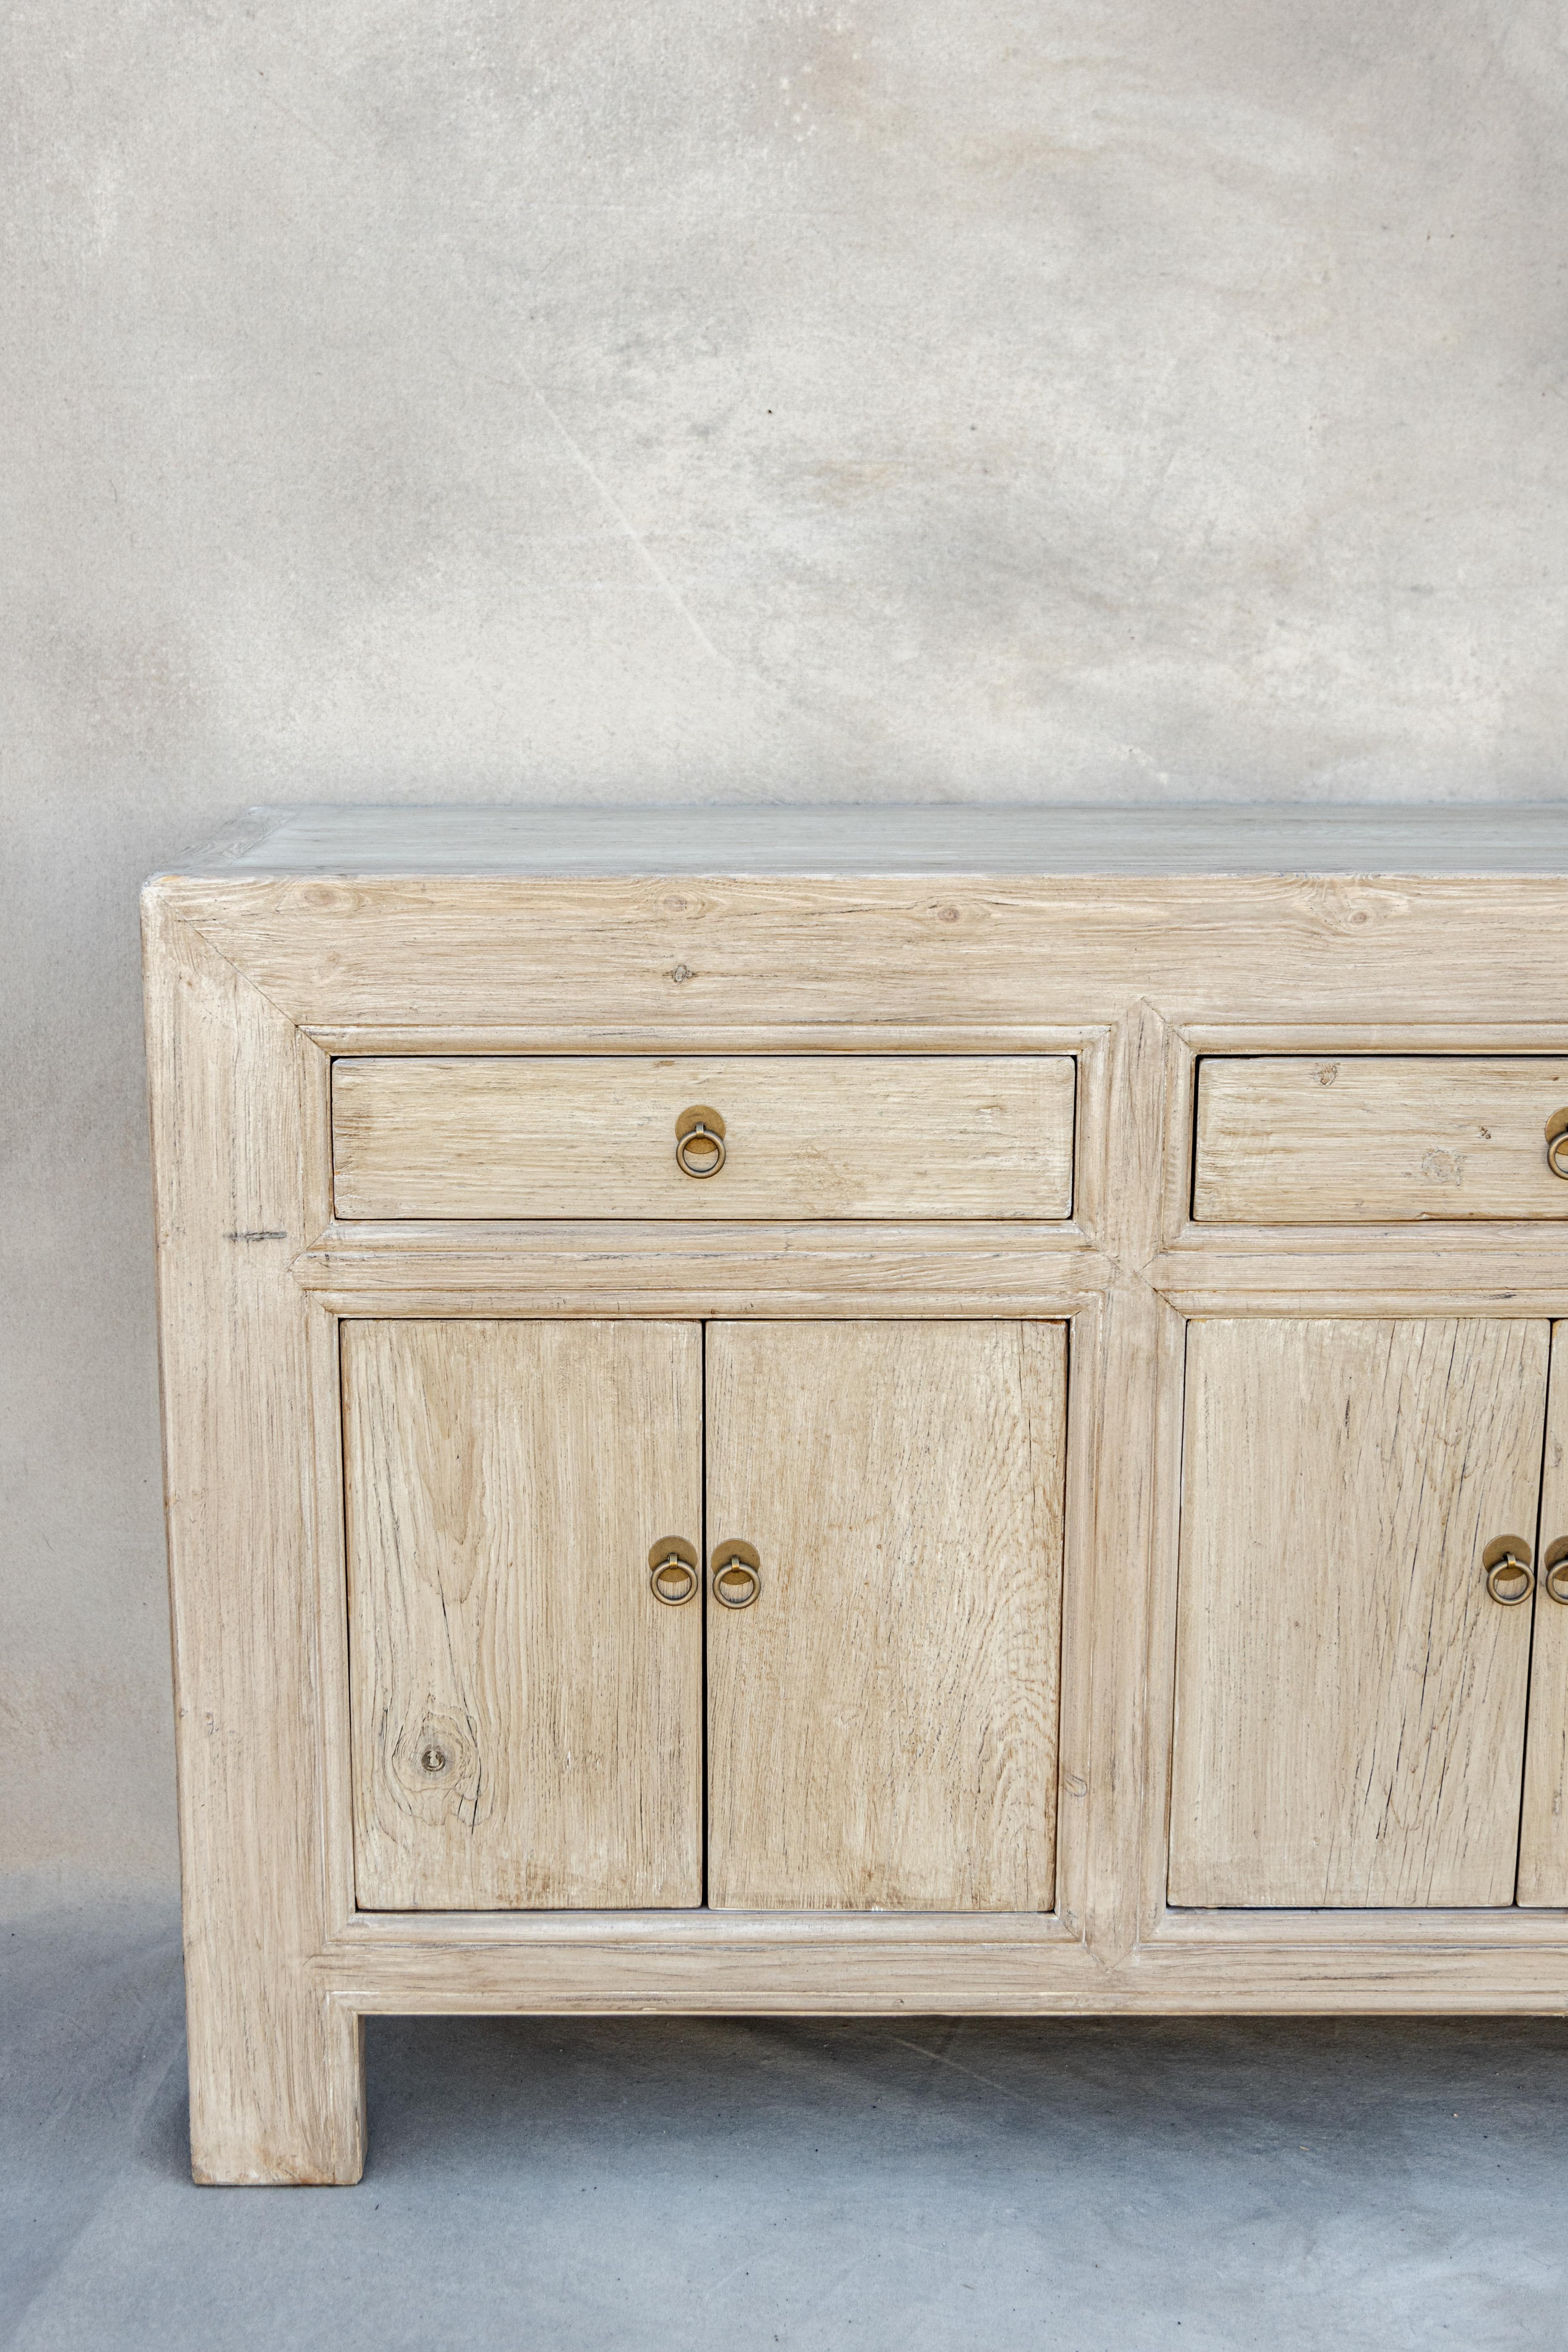 Introducing our Ella sideboard. She has four drawers and eight doors. Crafted from vintage elm wood sourced throughout Europe and Asia. Her aesthetic is vintage inspired with stunning, one of a kind rustic textures. She would be beautifully styled